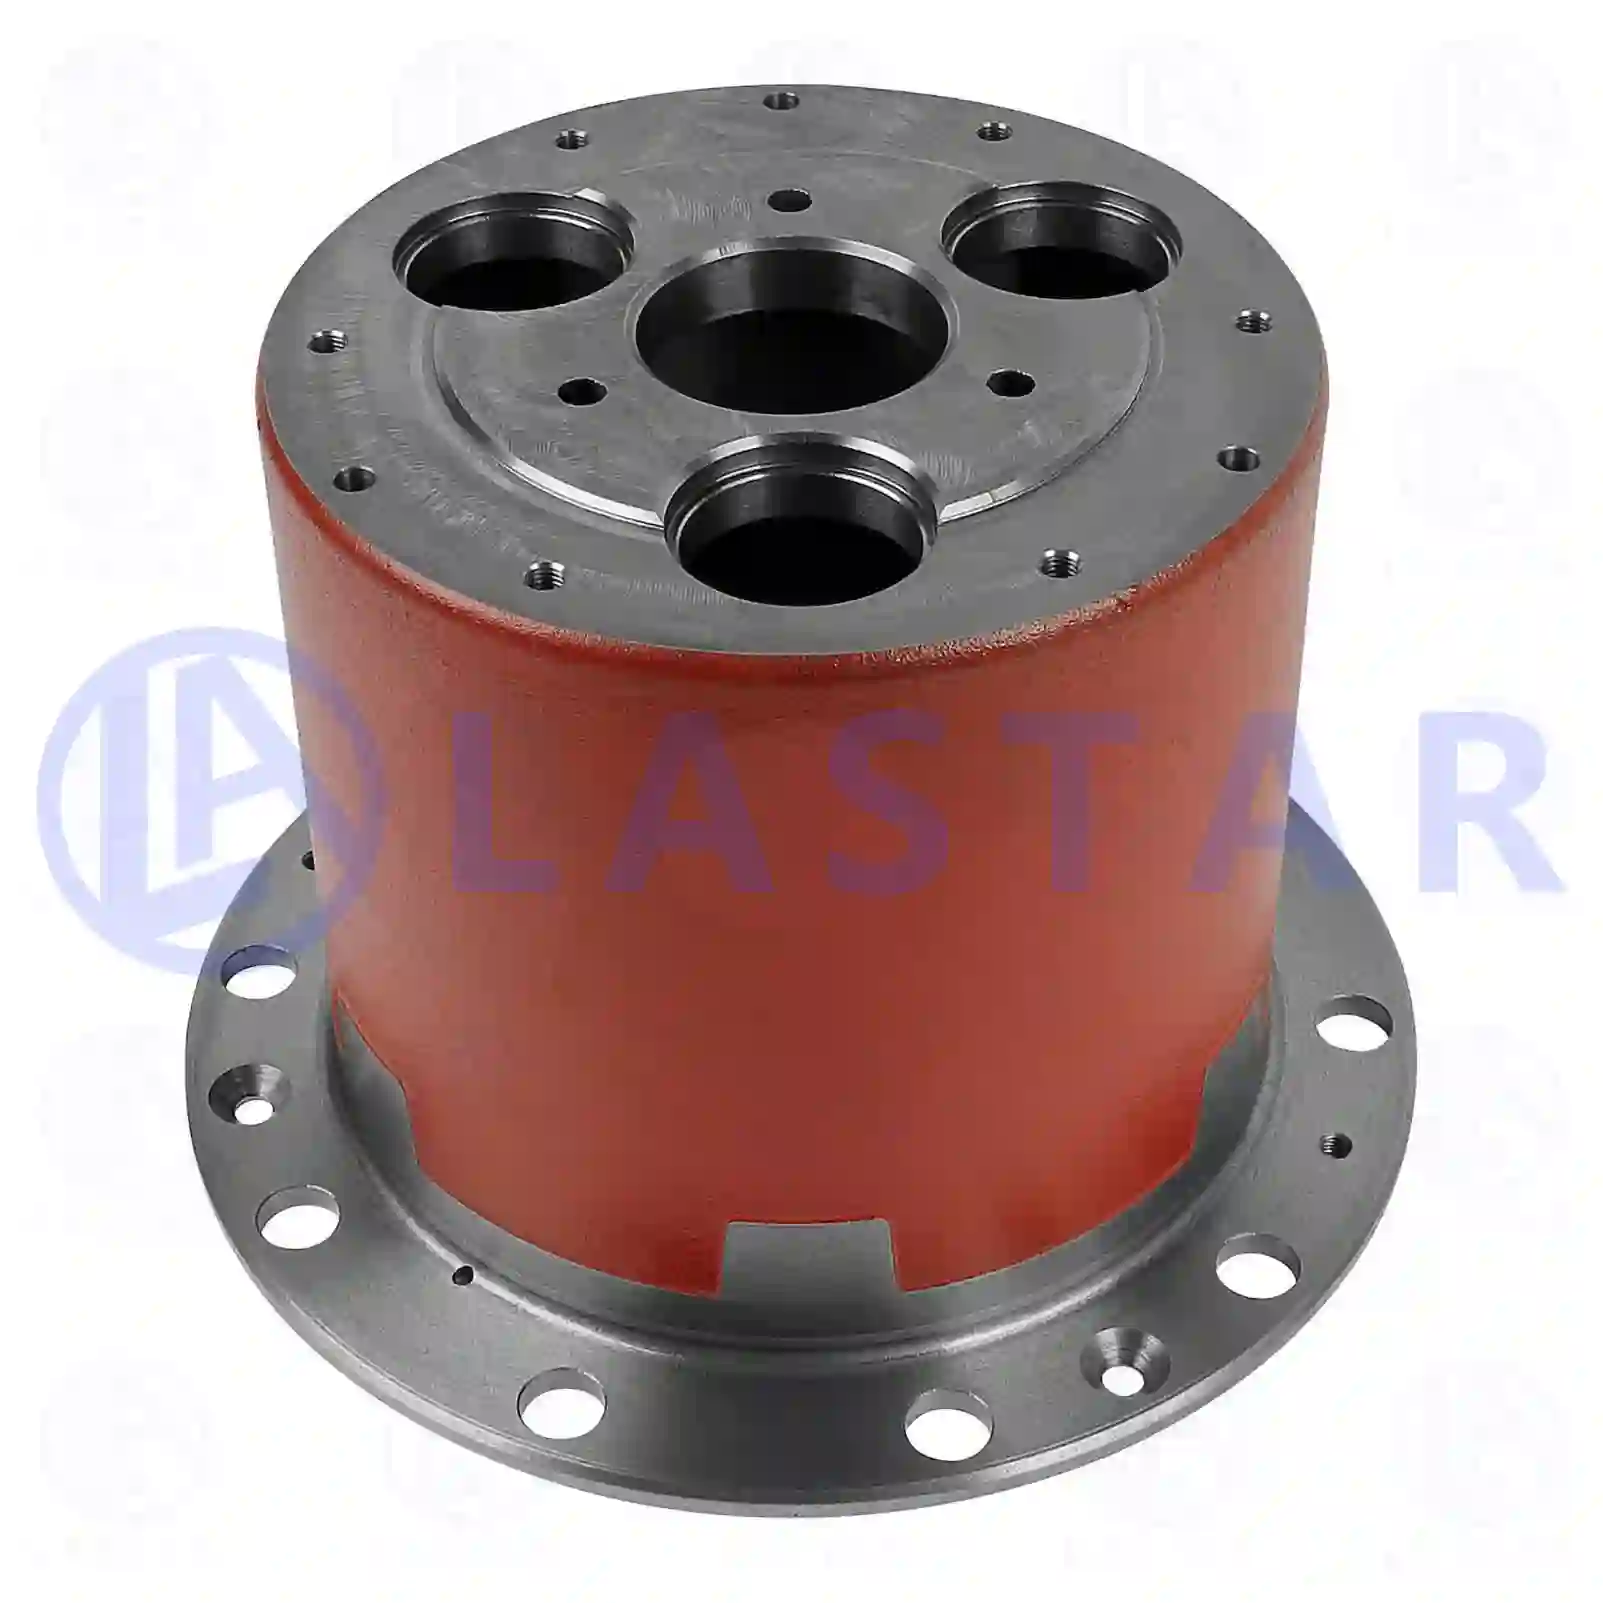 Planetary carrier, 77731324, 42118227, ZG30099-0008 ||  77731324 Lastar Spare Part | Truck Spare Parts, Auotomotive Spare Parts Planetary carrier, 77731324, 42118227, ZG30099-0008 ||  77731324 Lastar Spare Part | Truck Spare Parts, Auotomotive Spare Parts